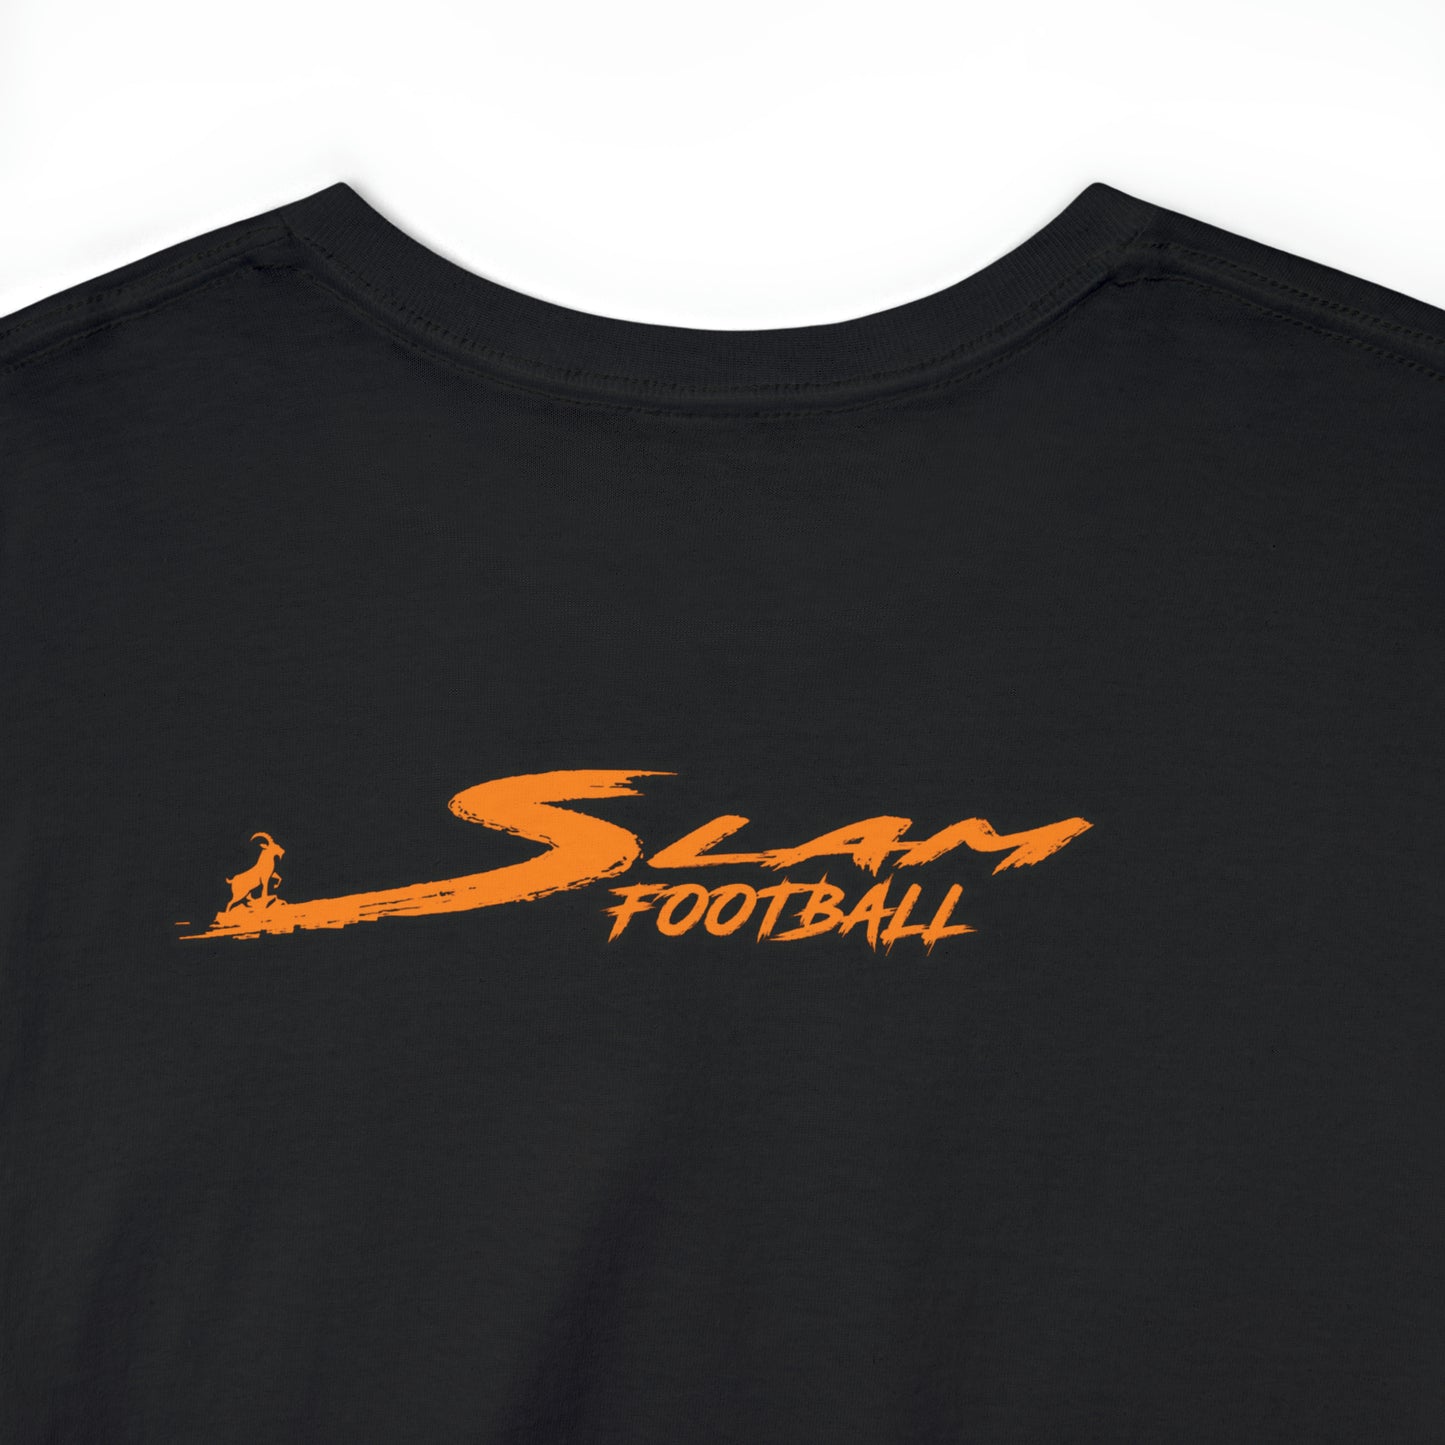 🏈🎉 Celebrate the Demon Football Legacy with Our Exclusive "2023" Tee! 🎉🏈